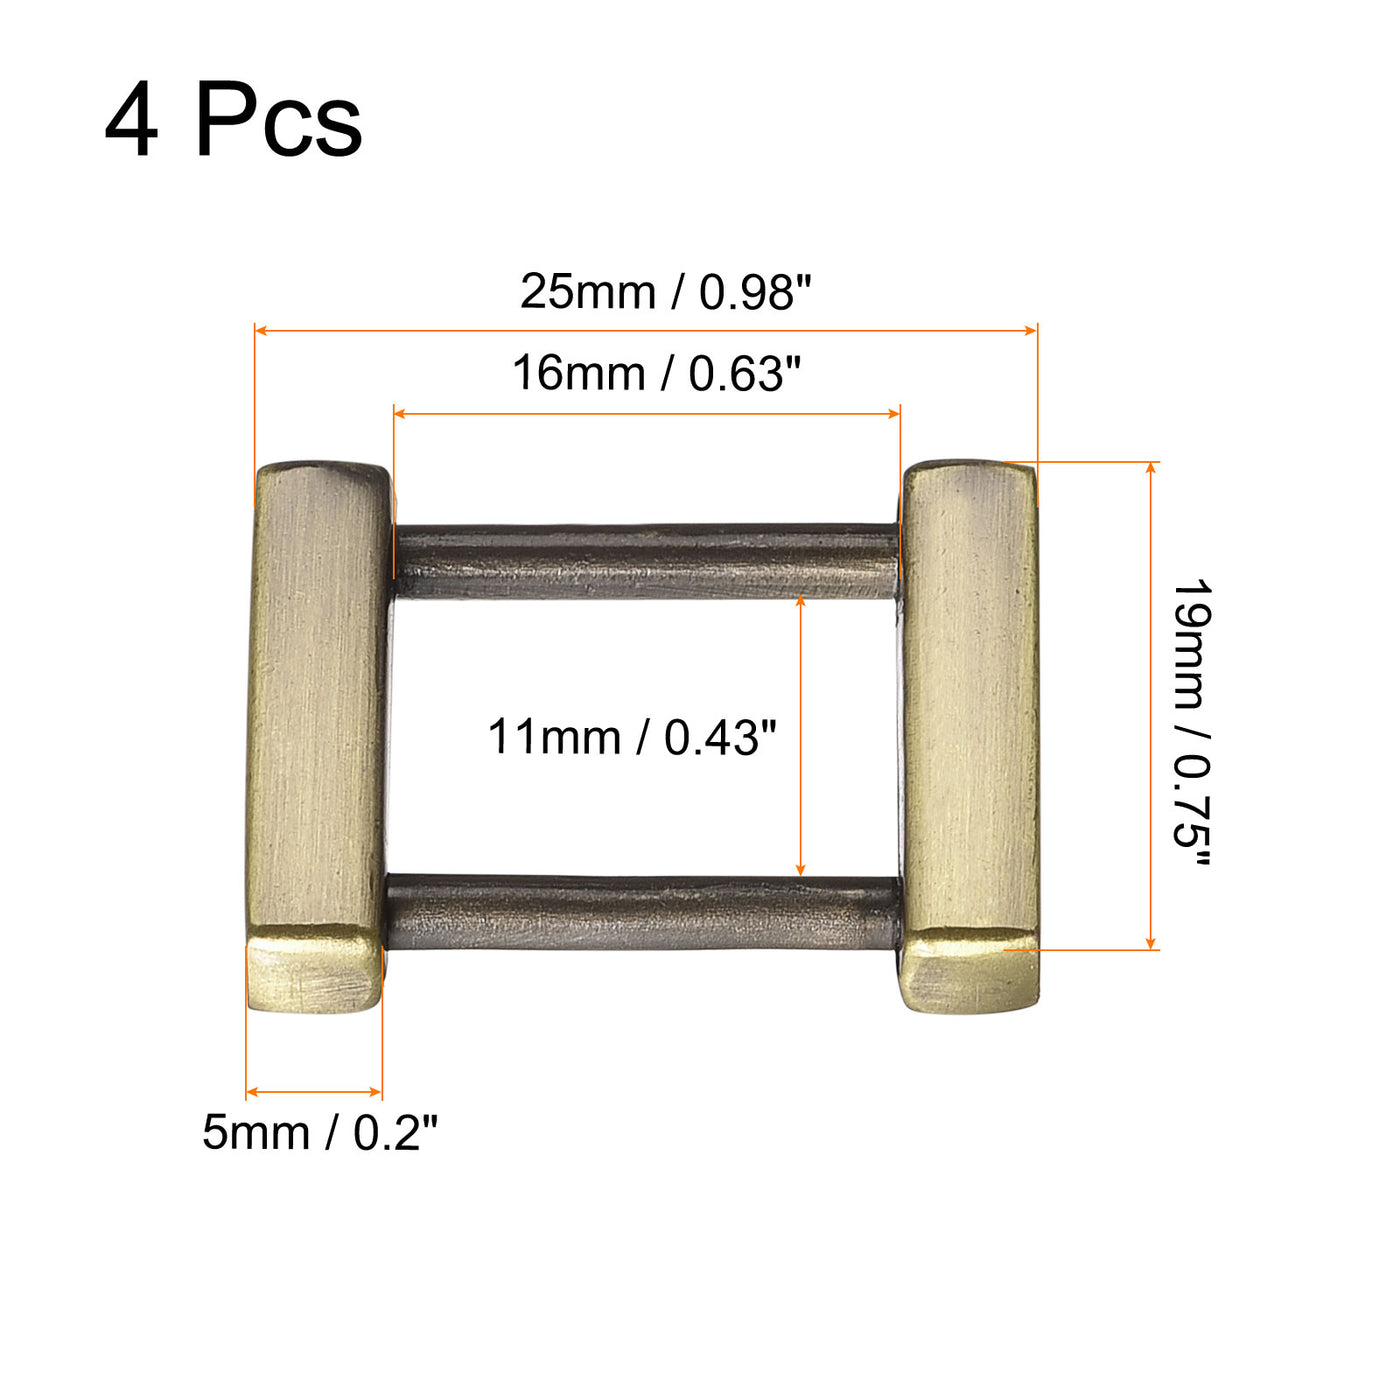 Uxcell Uxcell 1 Inch Rectangle Screw Ring Buckle Strap Connector Purse Bag Loop, 4Pcs Silver